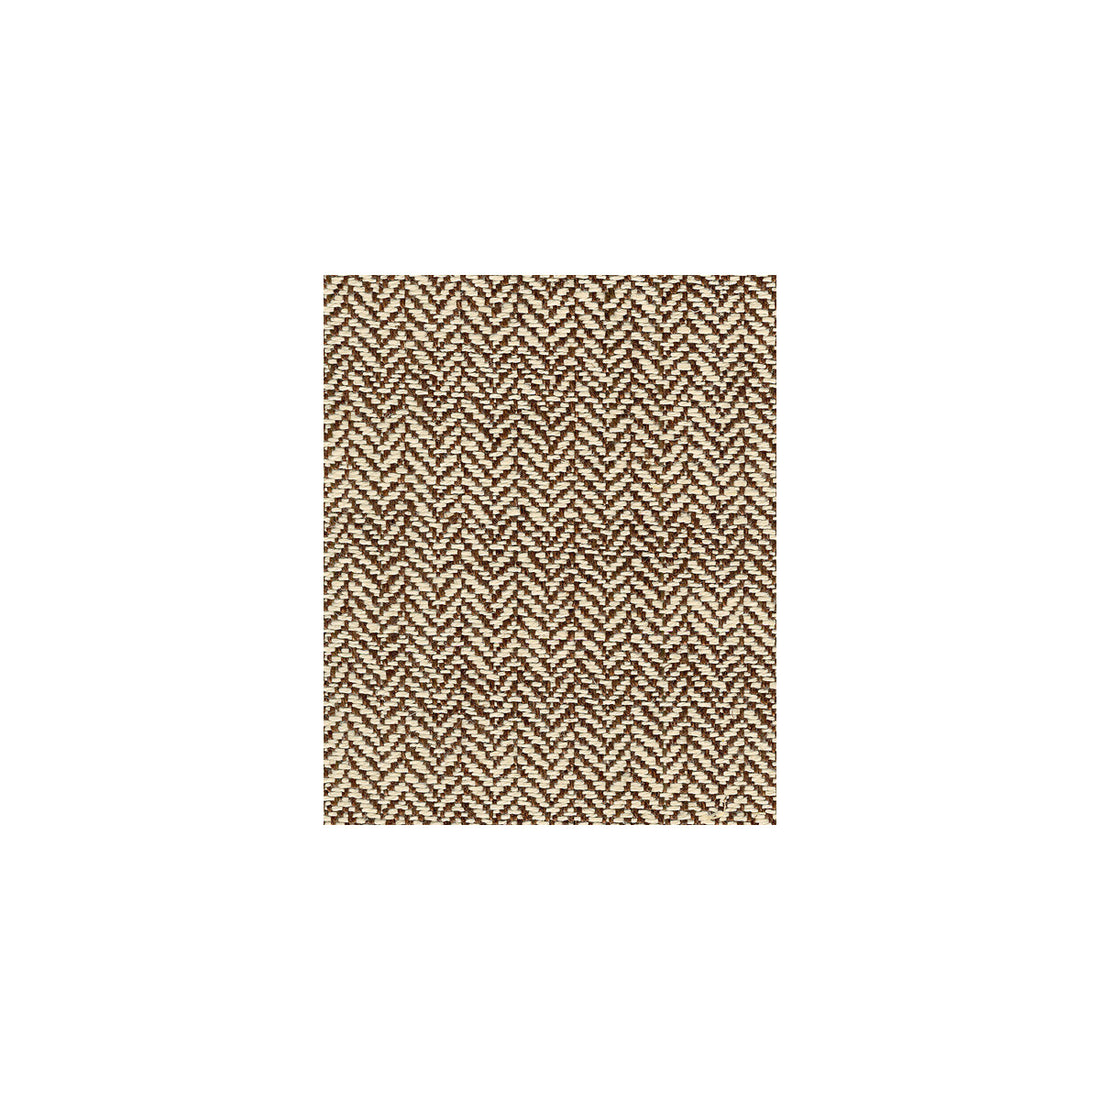 Scl370 fabric in sc color - pattern SCL370.SC.0 - by Seacloth